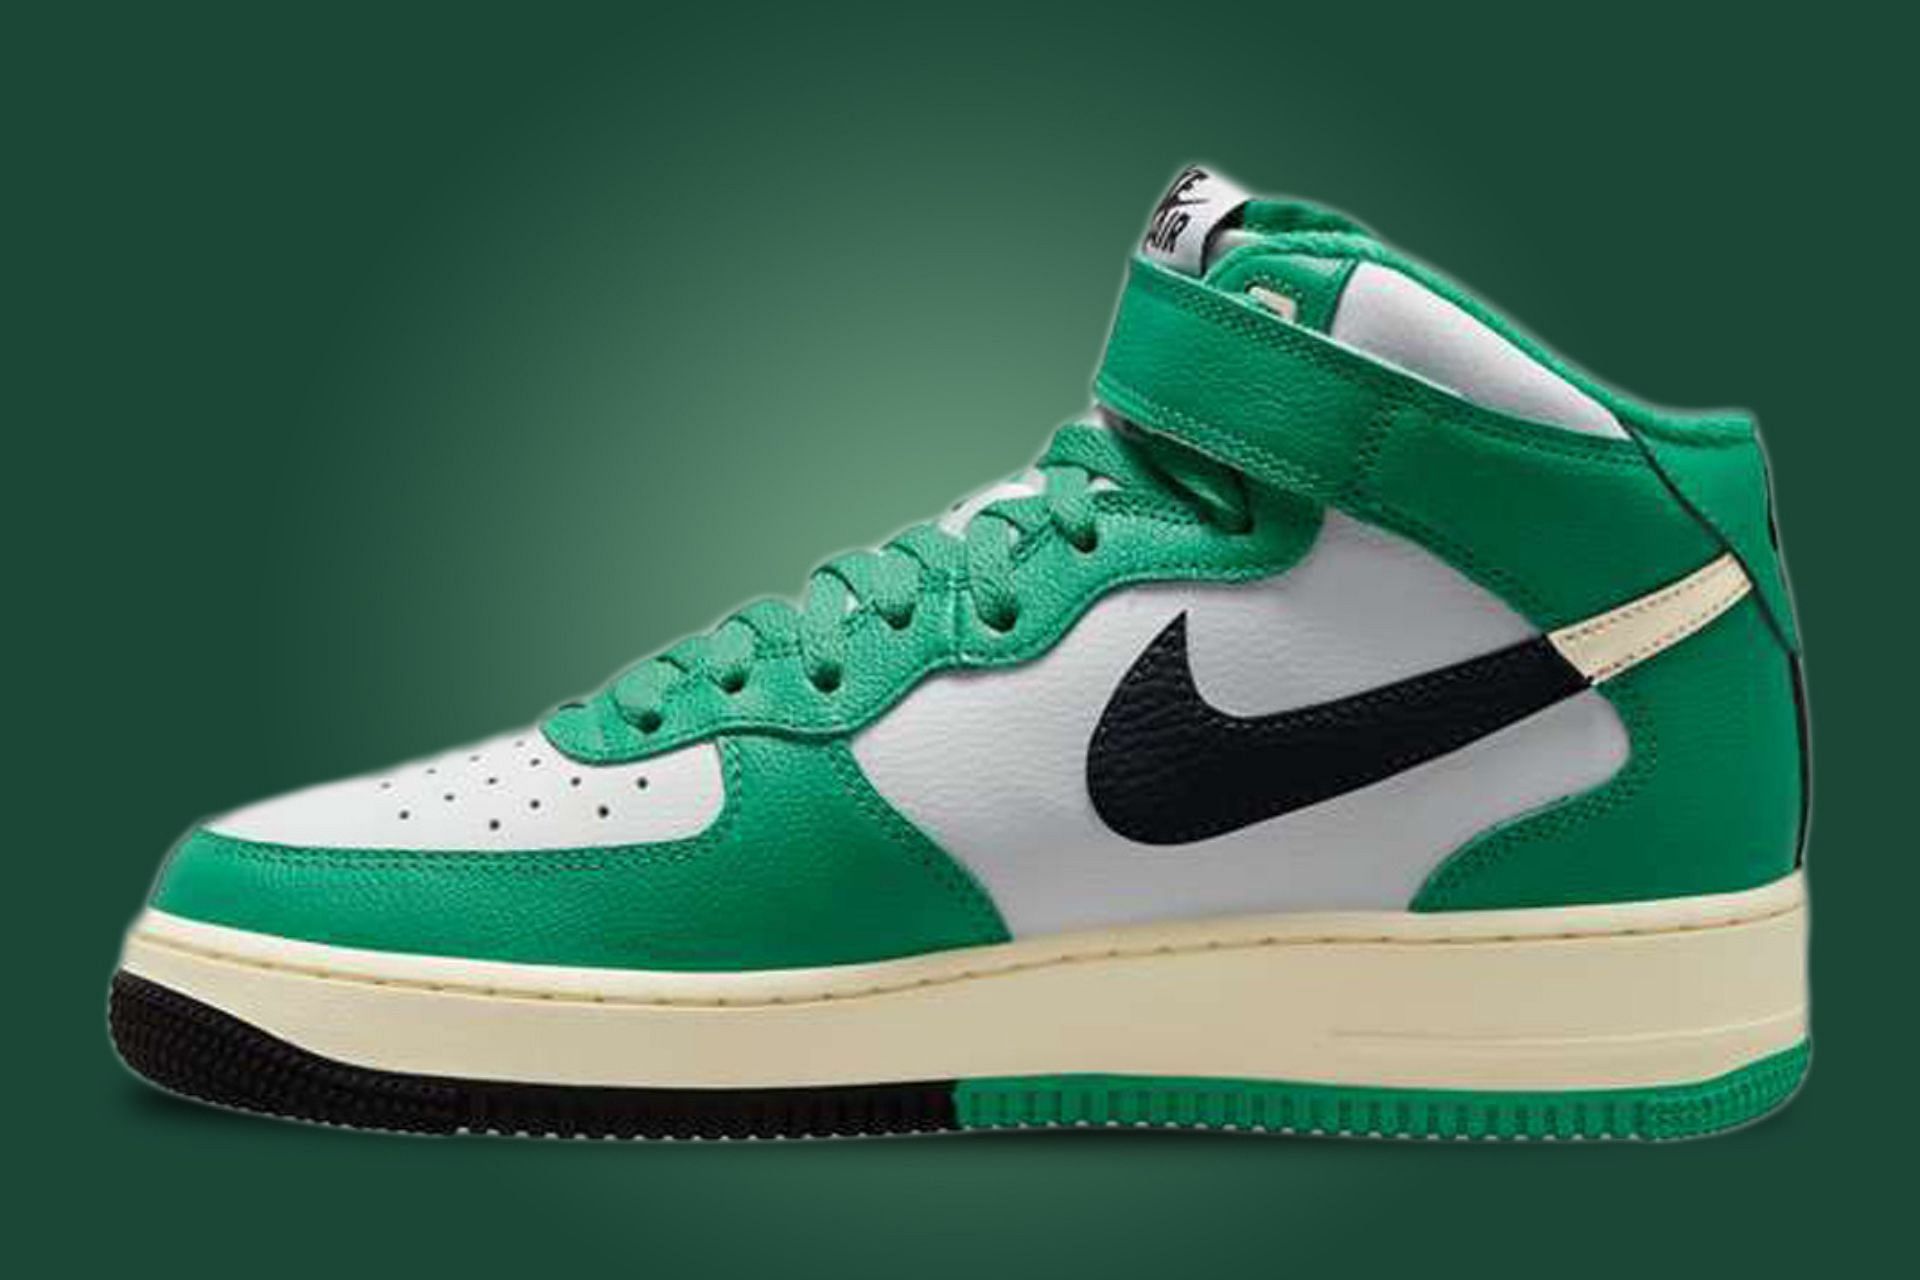 Nike: Nike Air Force 1 Mid 'Summit White Stadium Green' Where to buy, price, and more explored